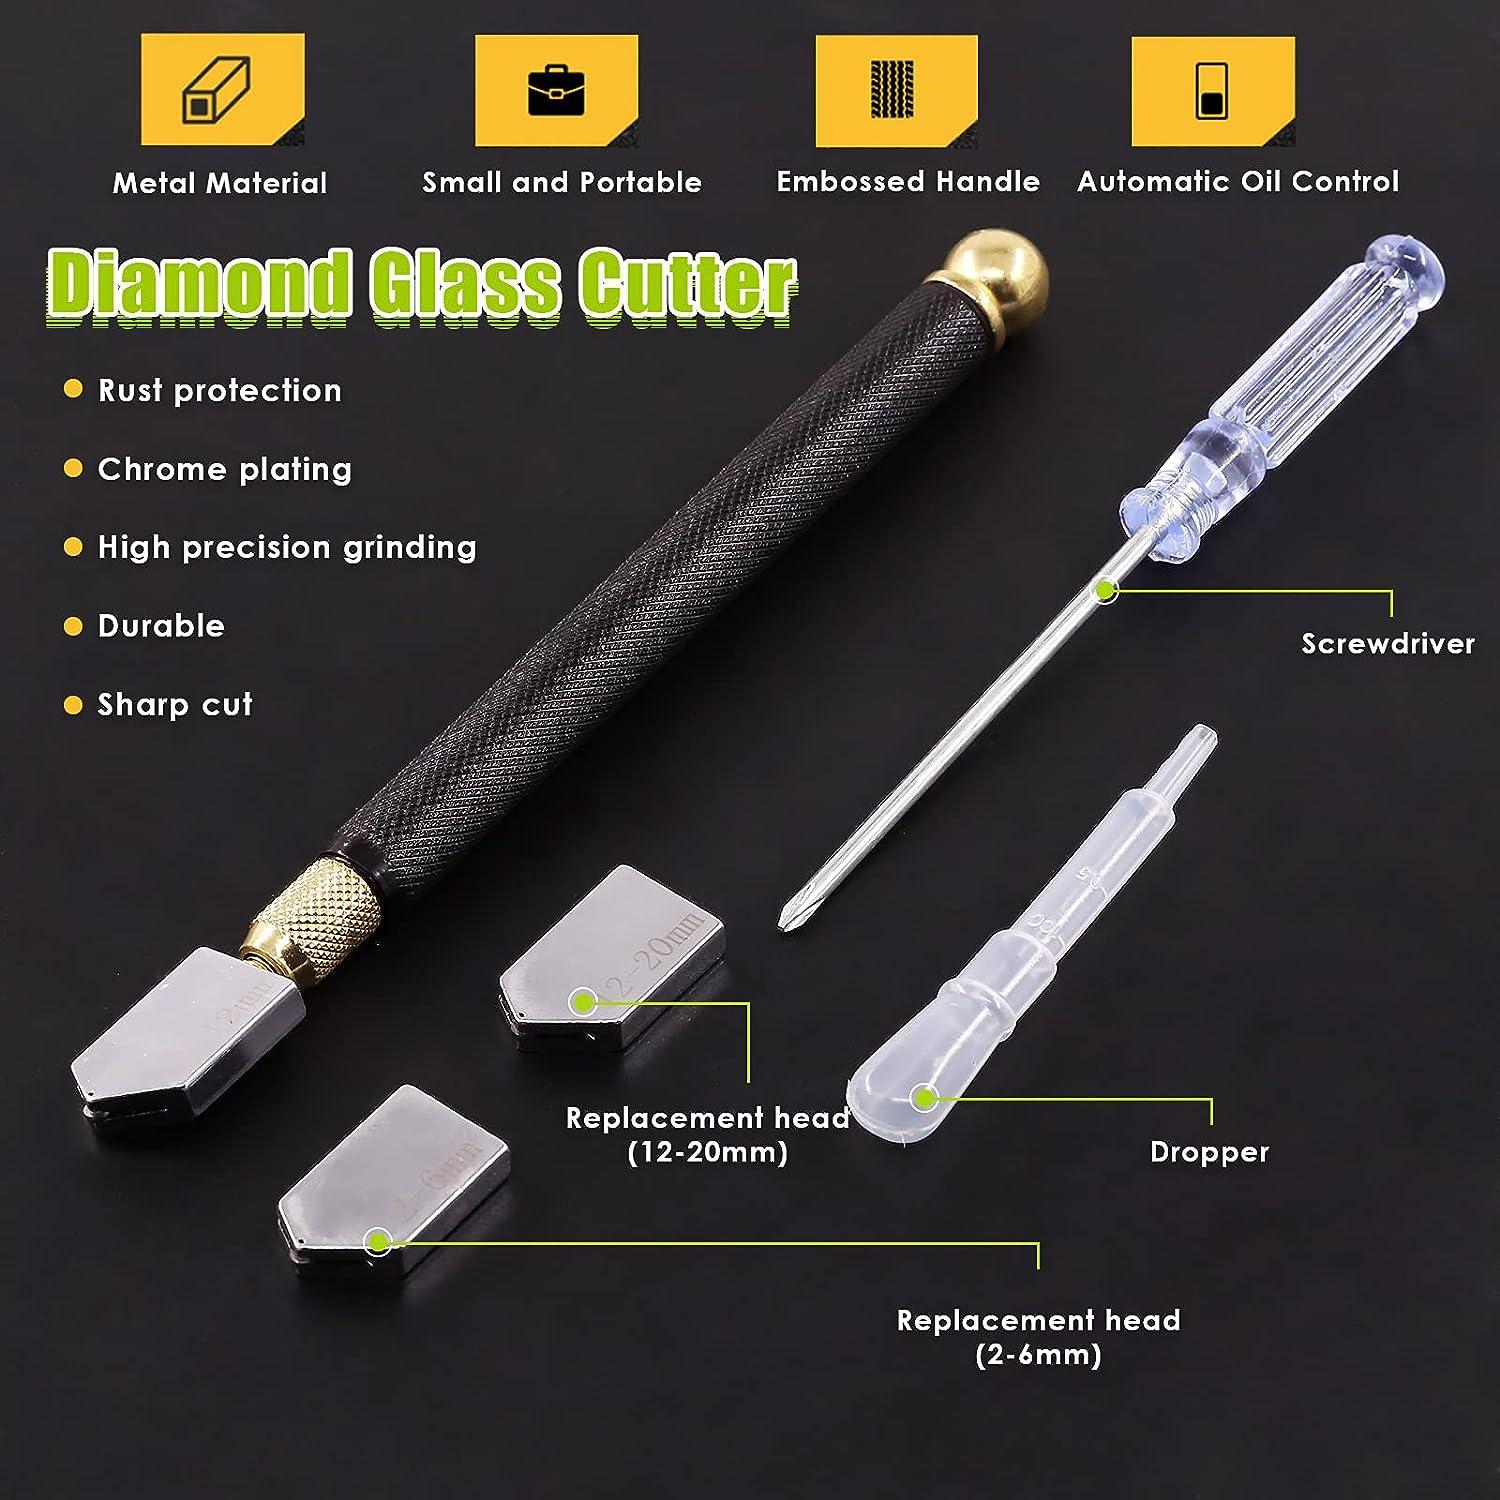 Glass Cutter for Window Glass Cutting Tool with Glass Cutting Oil The Amazing Glass Cutter Is for Beginner or Professional Running Pliers Built Into